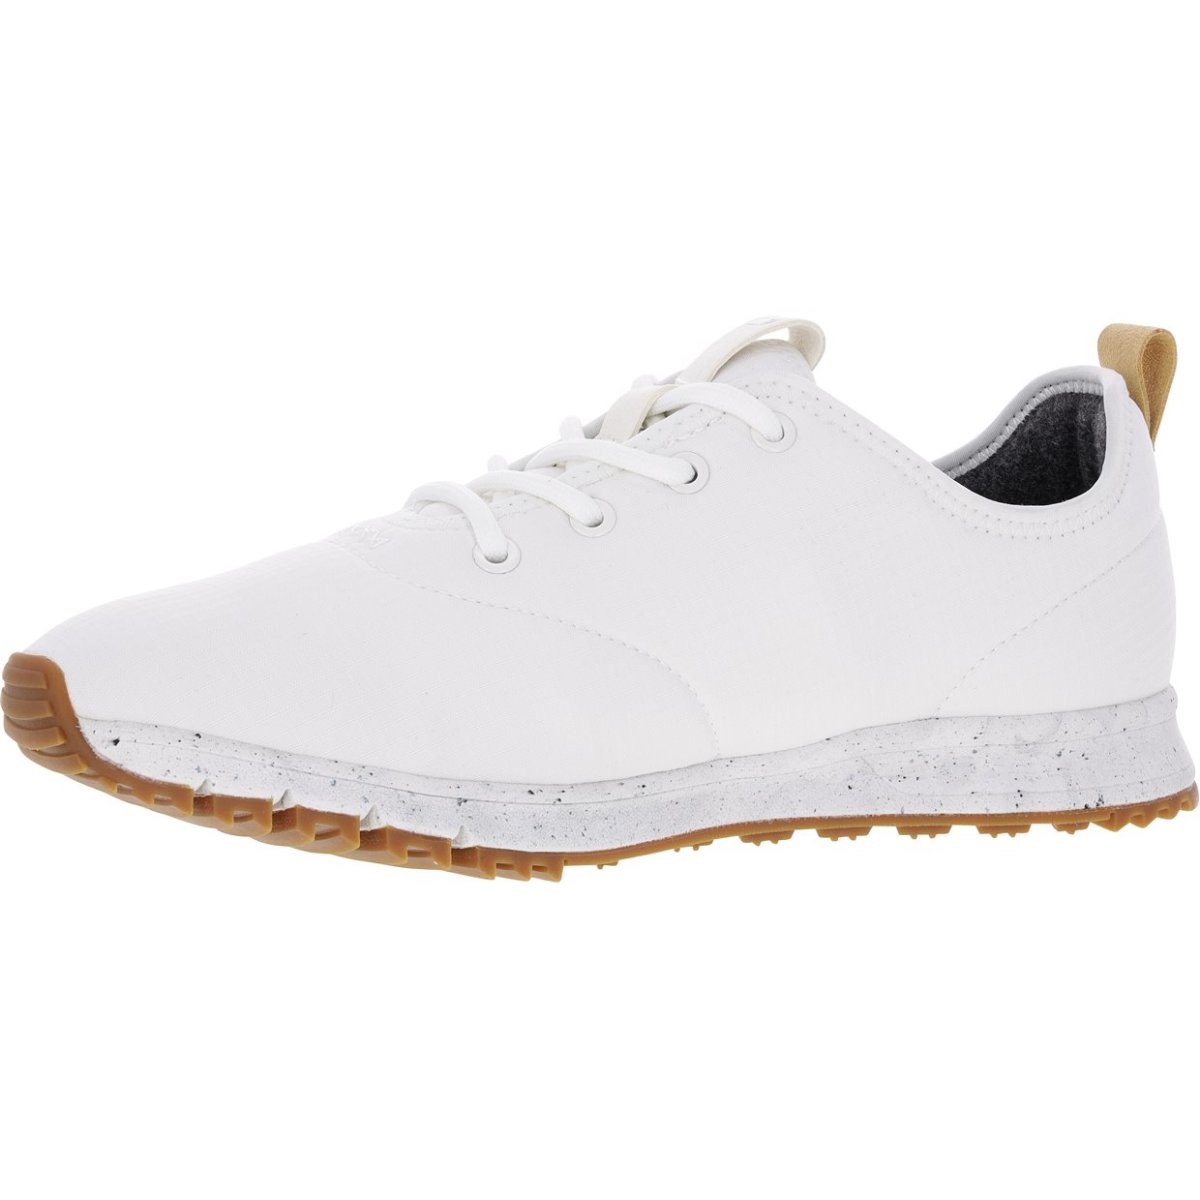 Shop the latest True Linkswear golf shoes, like the All Day Riptop, on Morning Read's online pro shop.